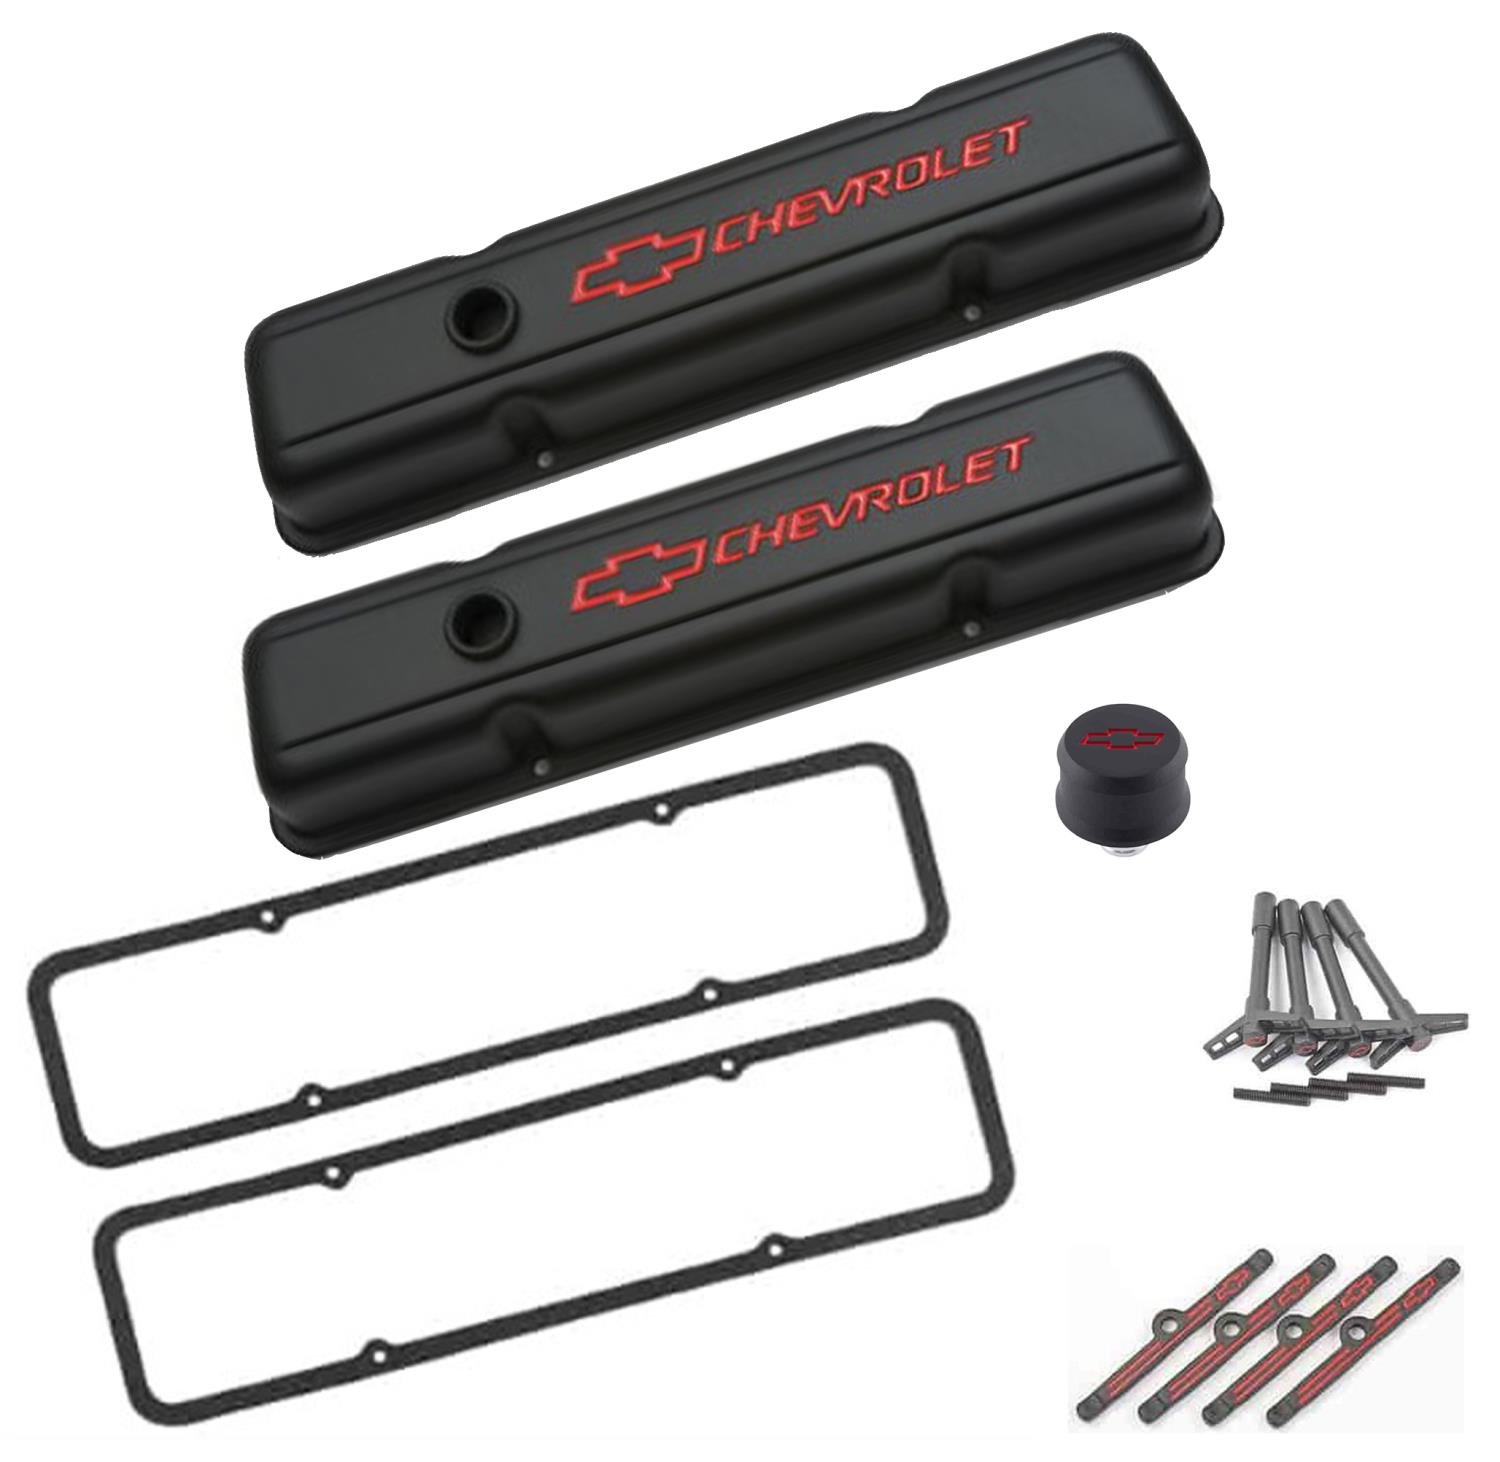 Valve Cover Kit for 1959-1986 Small Block Chevy 262-400 ci. [Black Crinkle Finish]